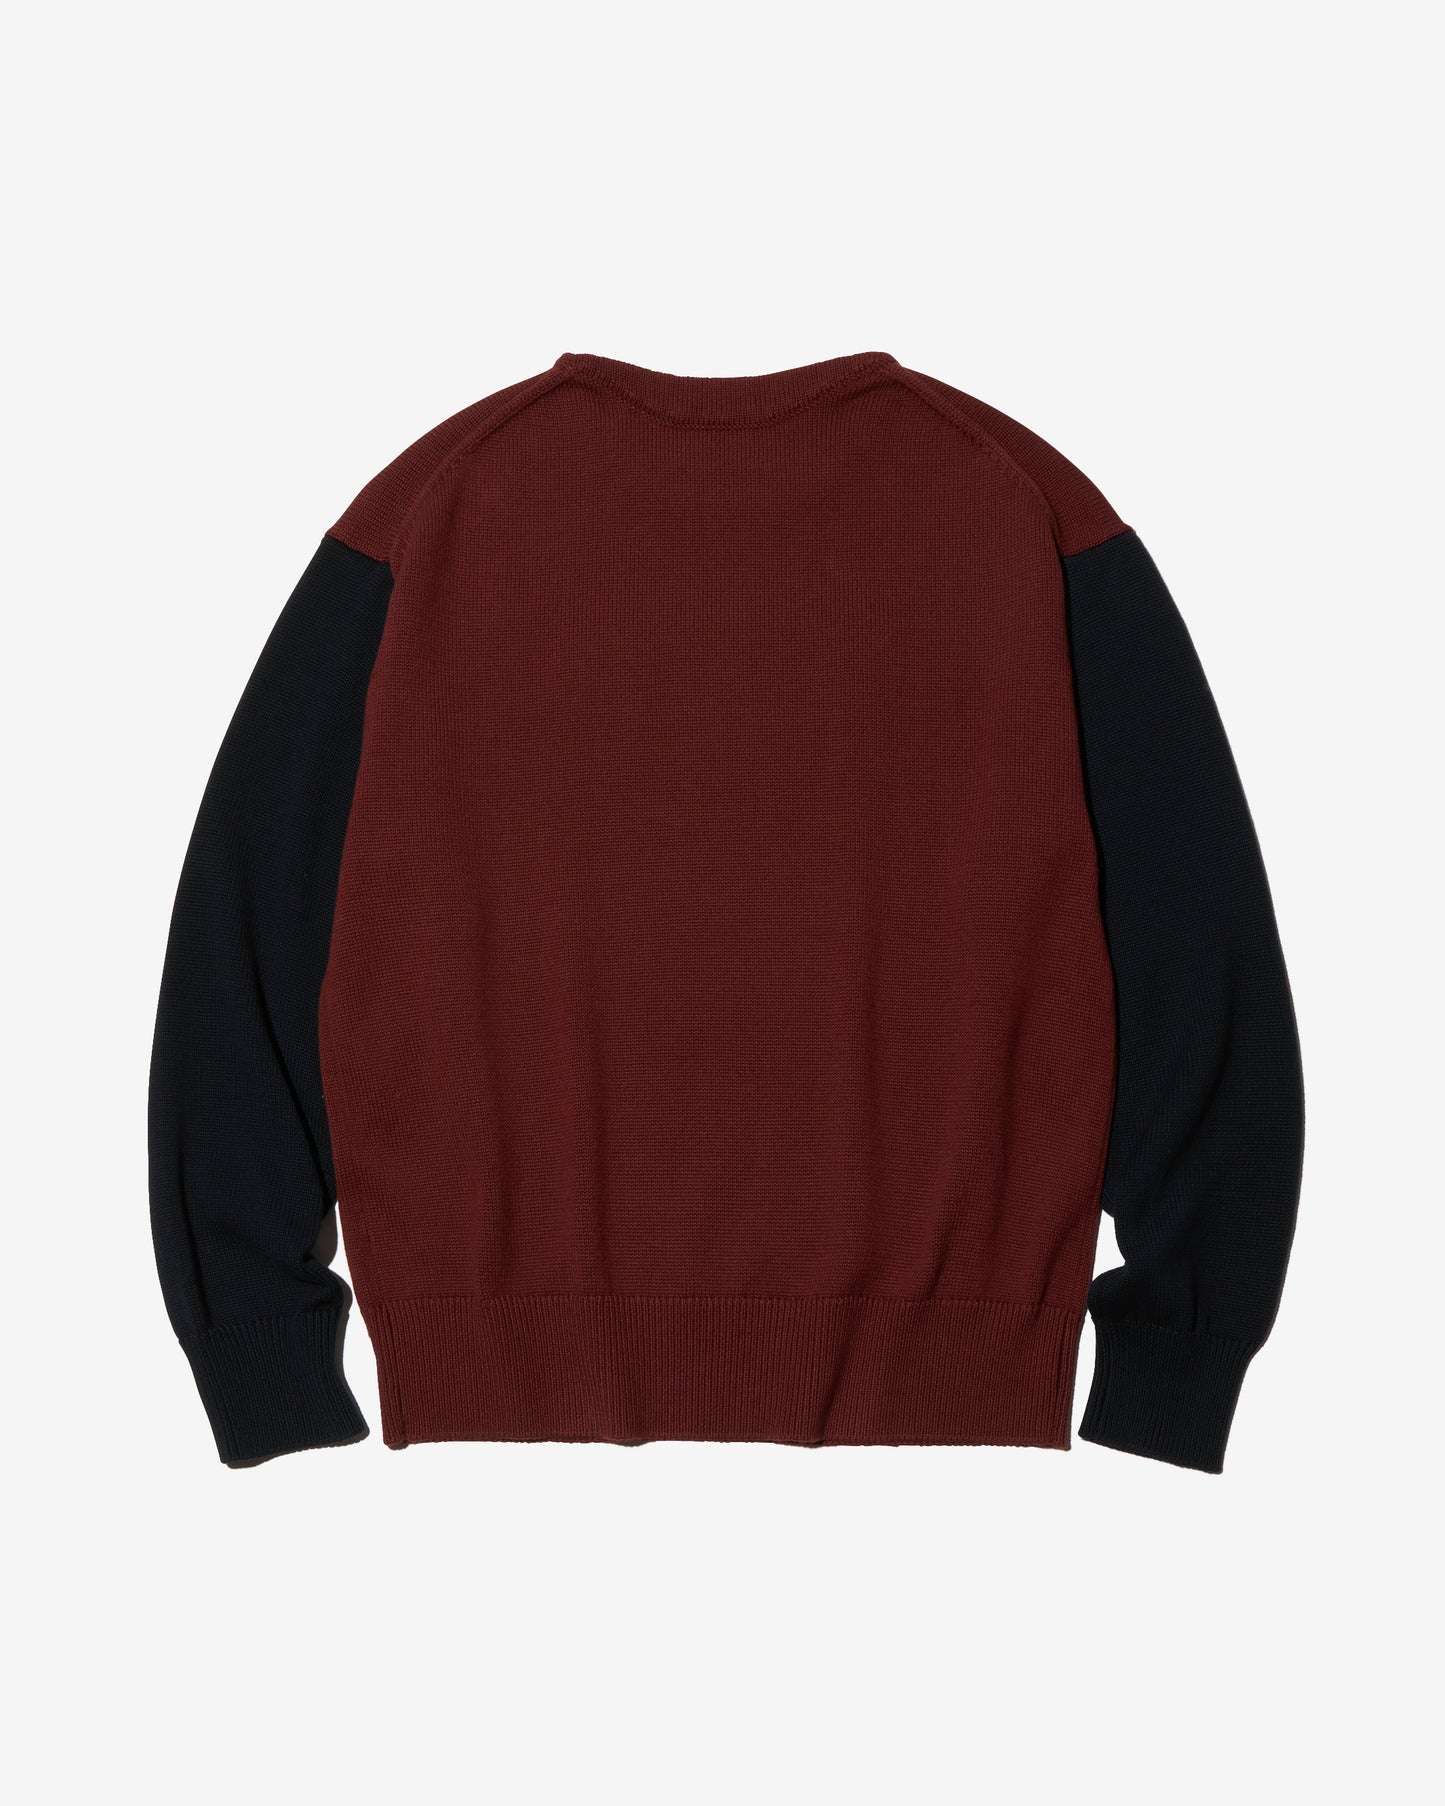 BICOLOR LETTERED SWEATER